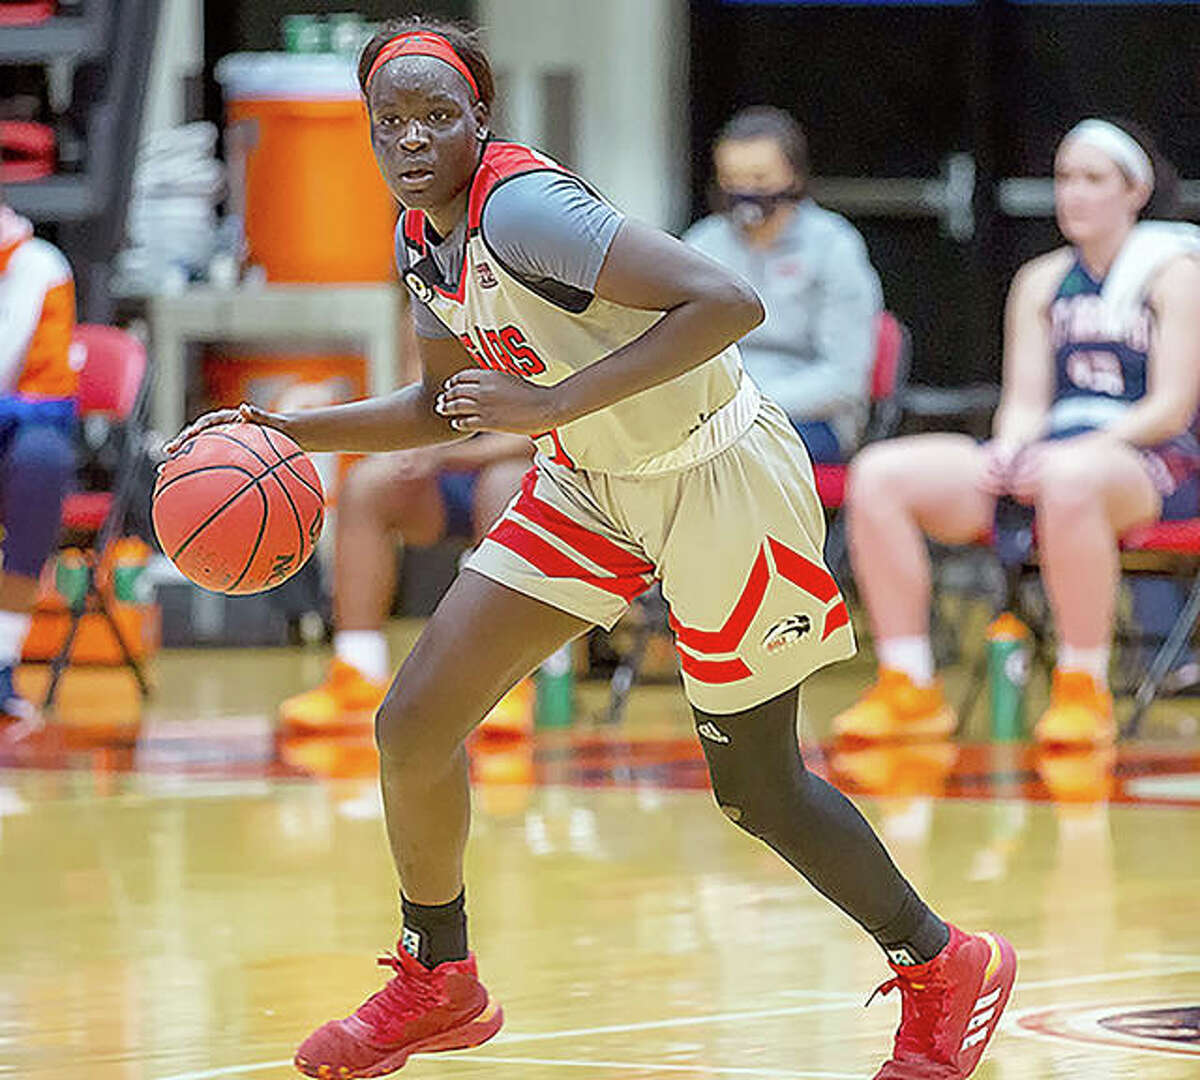 SIUE women’s basketball junior Ajulu Thatha from Gambella, Ehiopia, will take part in the 2021 Red Bull USA Basketball 3X Nationals June 12-13.